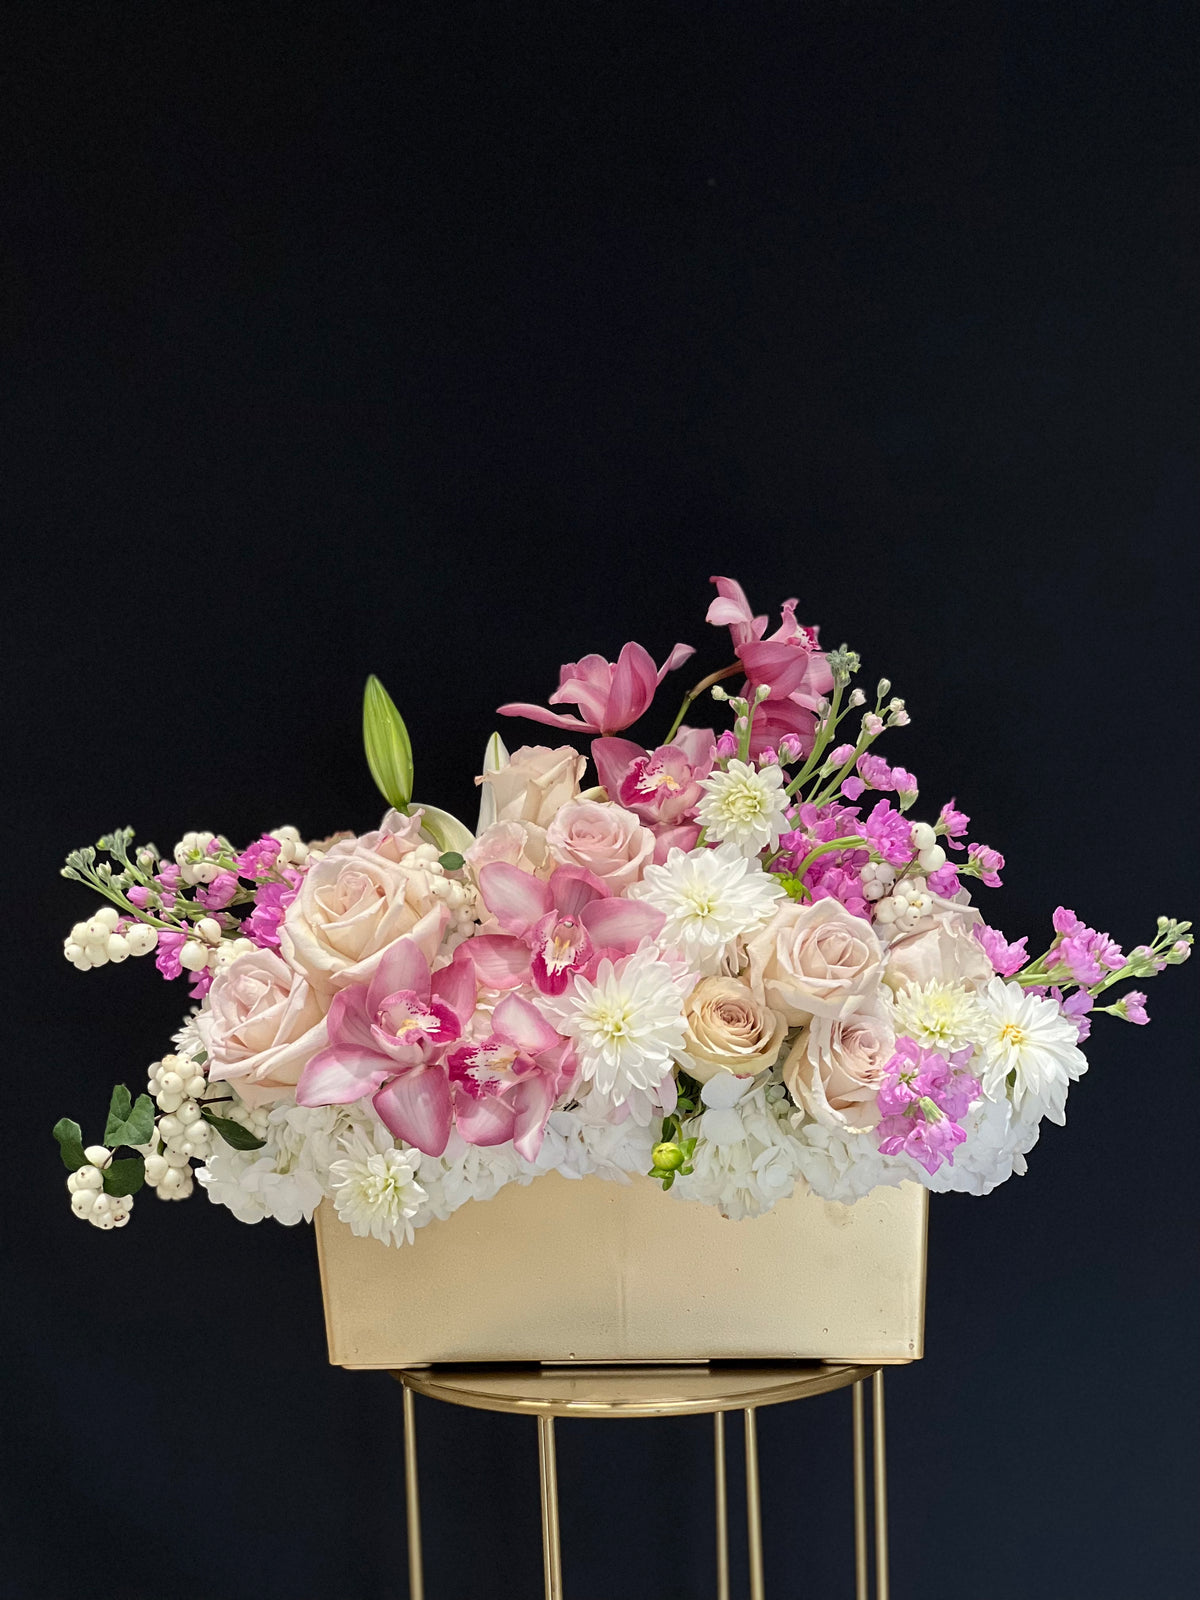 Pastel Dreams Modern Arrangement - A contemporary floral delight featuring white and pastel blooms of Stocks, Roses, Hydrangeas, and Orchids, perfect for birthdays, anniversaries, and special occasions